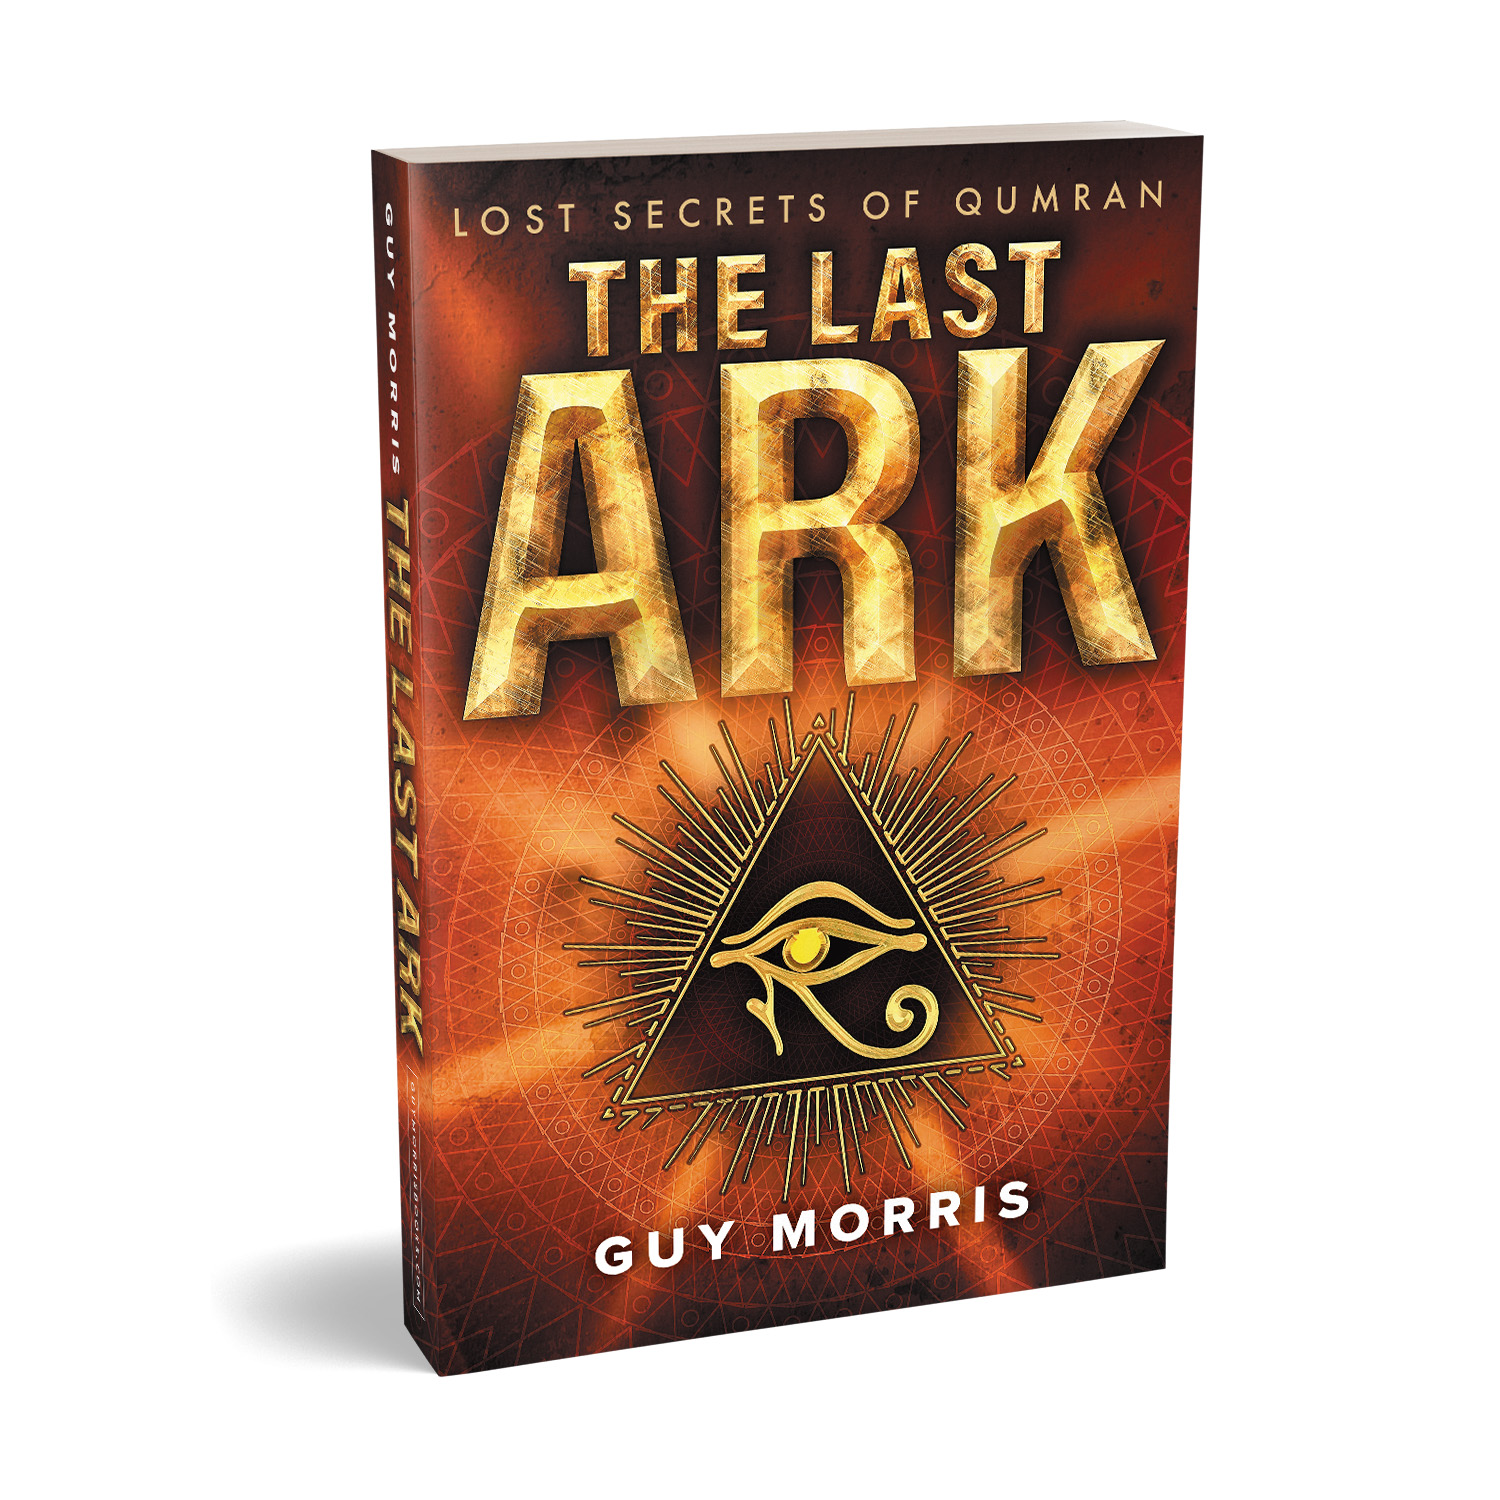 'The Last Ark' is a thrilling hybrid cyber thriller action thriller novel. The author is Guy Morris. The book cover design & interior formatting are by Mark Thomas. To learn more about what Mark could do for your book, please visit coverness.com.